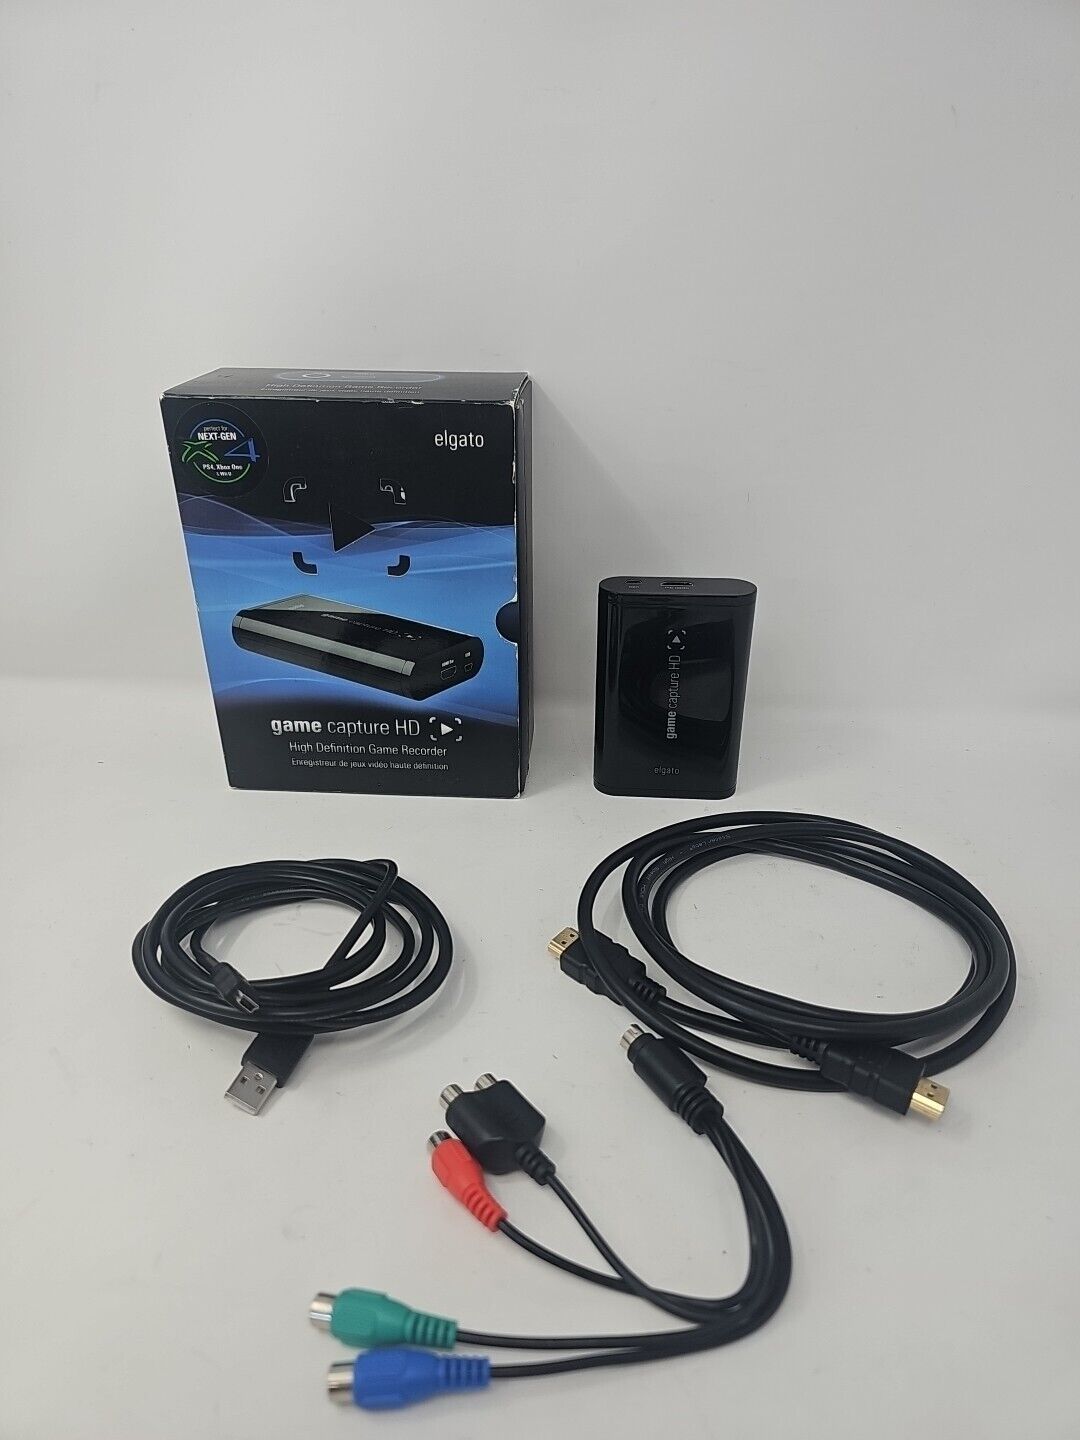 ELGATO Game Capture HD High Definition Game Recorder W/ Cables & Box